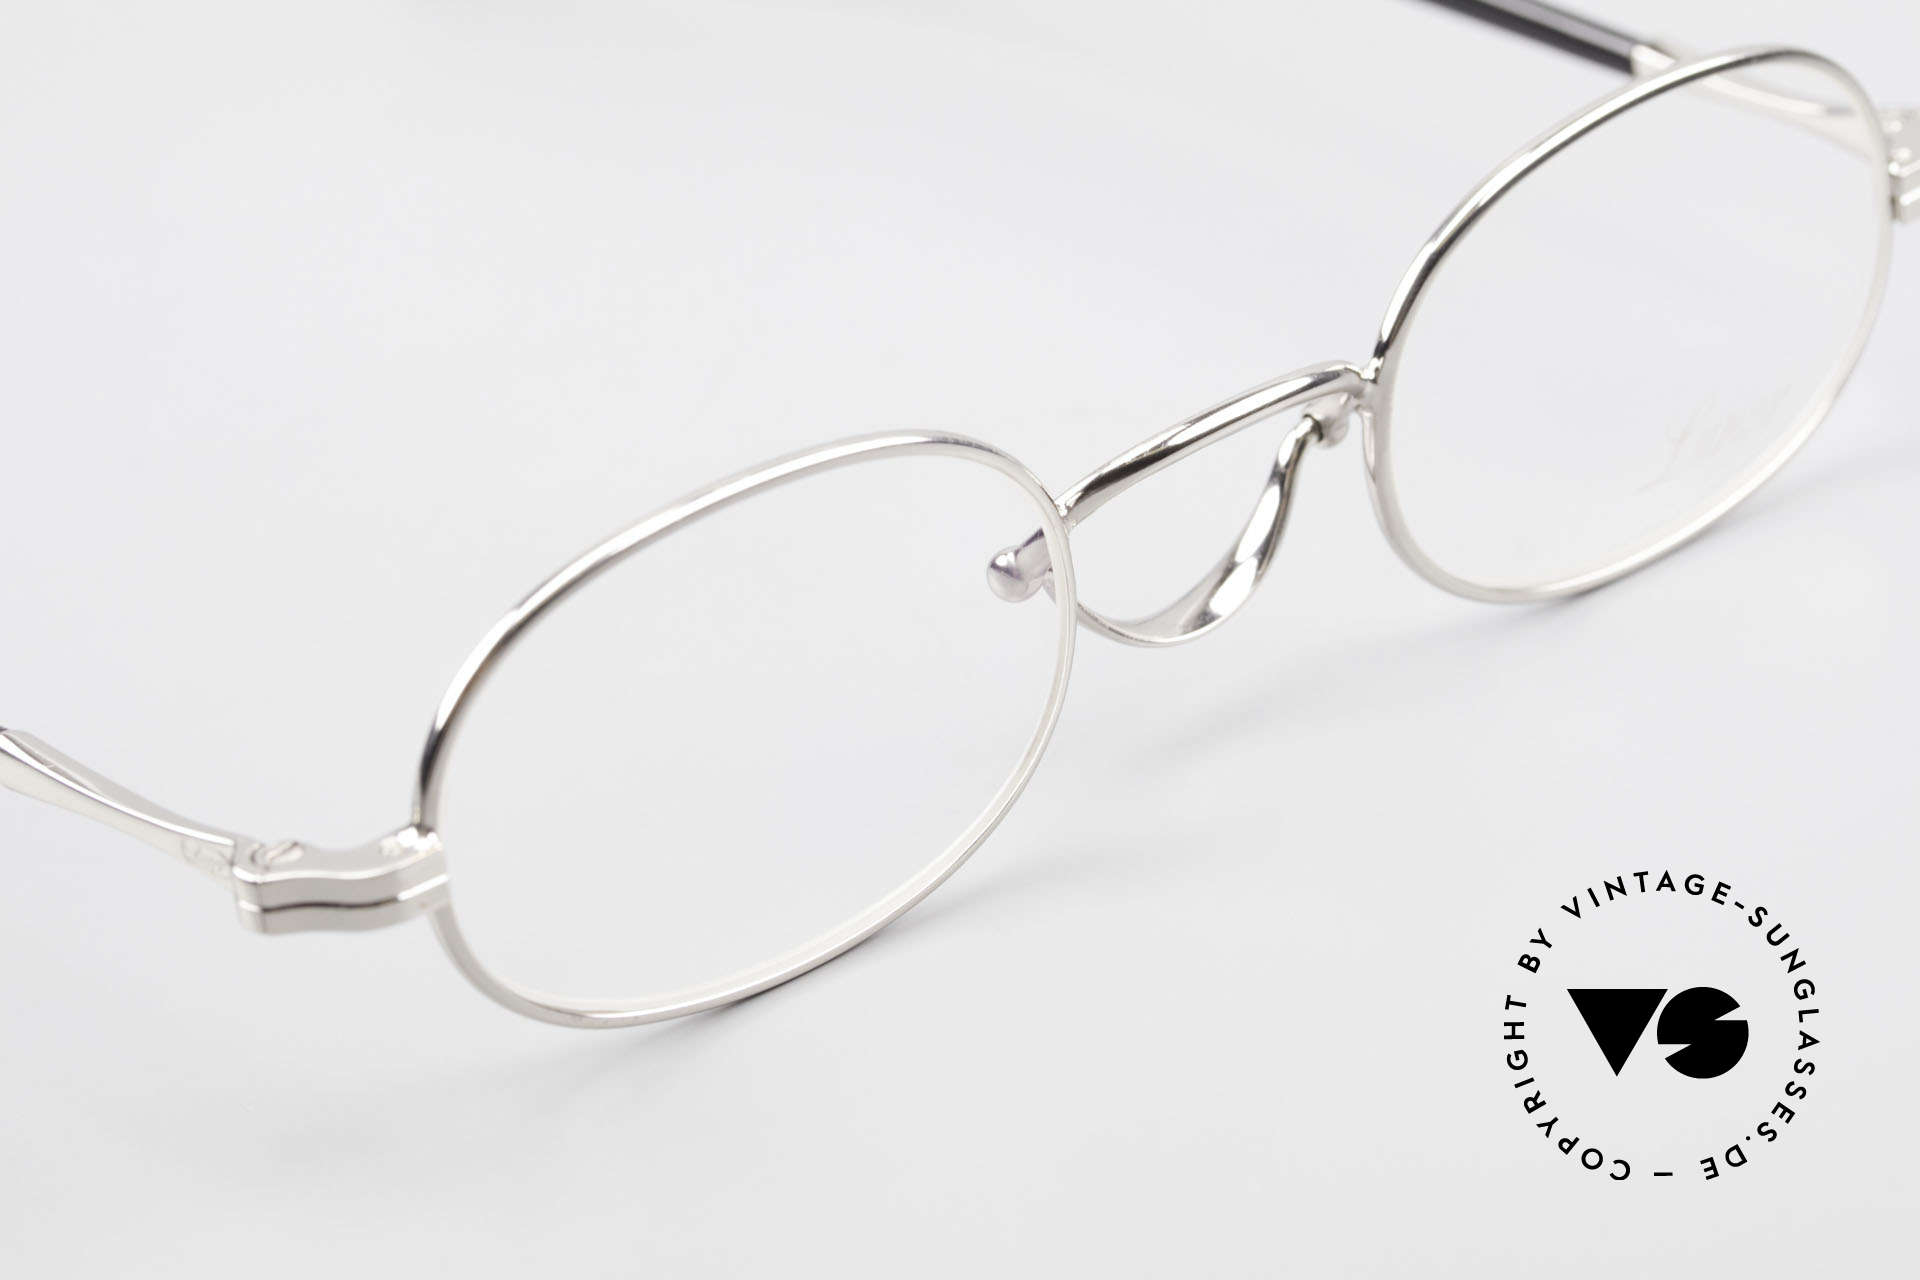 Lunor Swing A 36 Oval Swing Bridge Vintage Glasses, FRAME is PLATINUM-PLATED'; truly sophisticated specs, Made for Men and Women